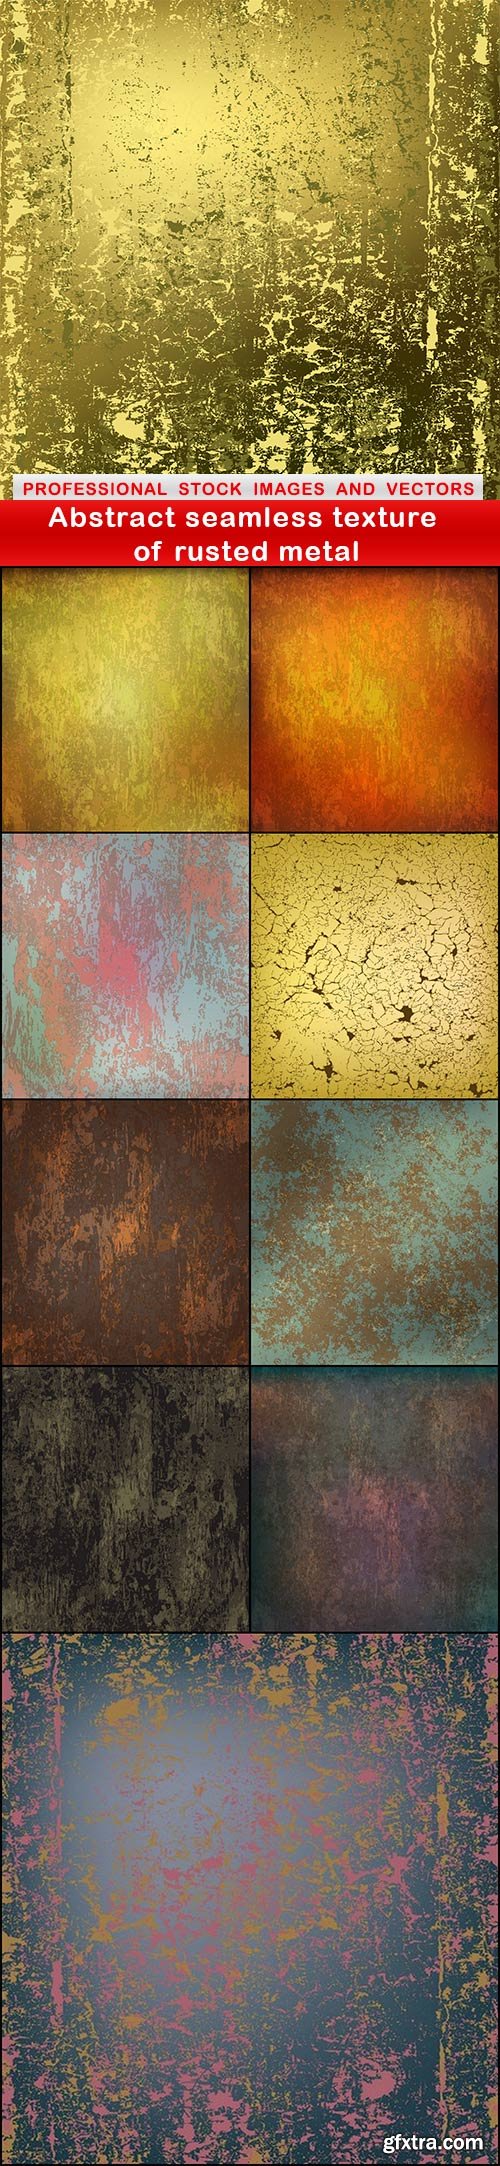 Abstract seamless texture of rusted metal - 10 EPS